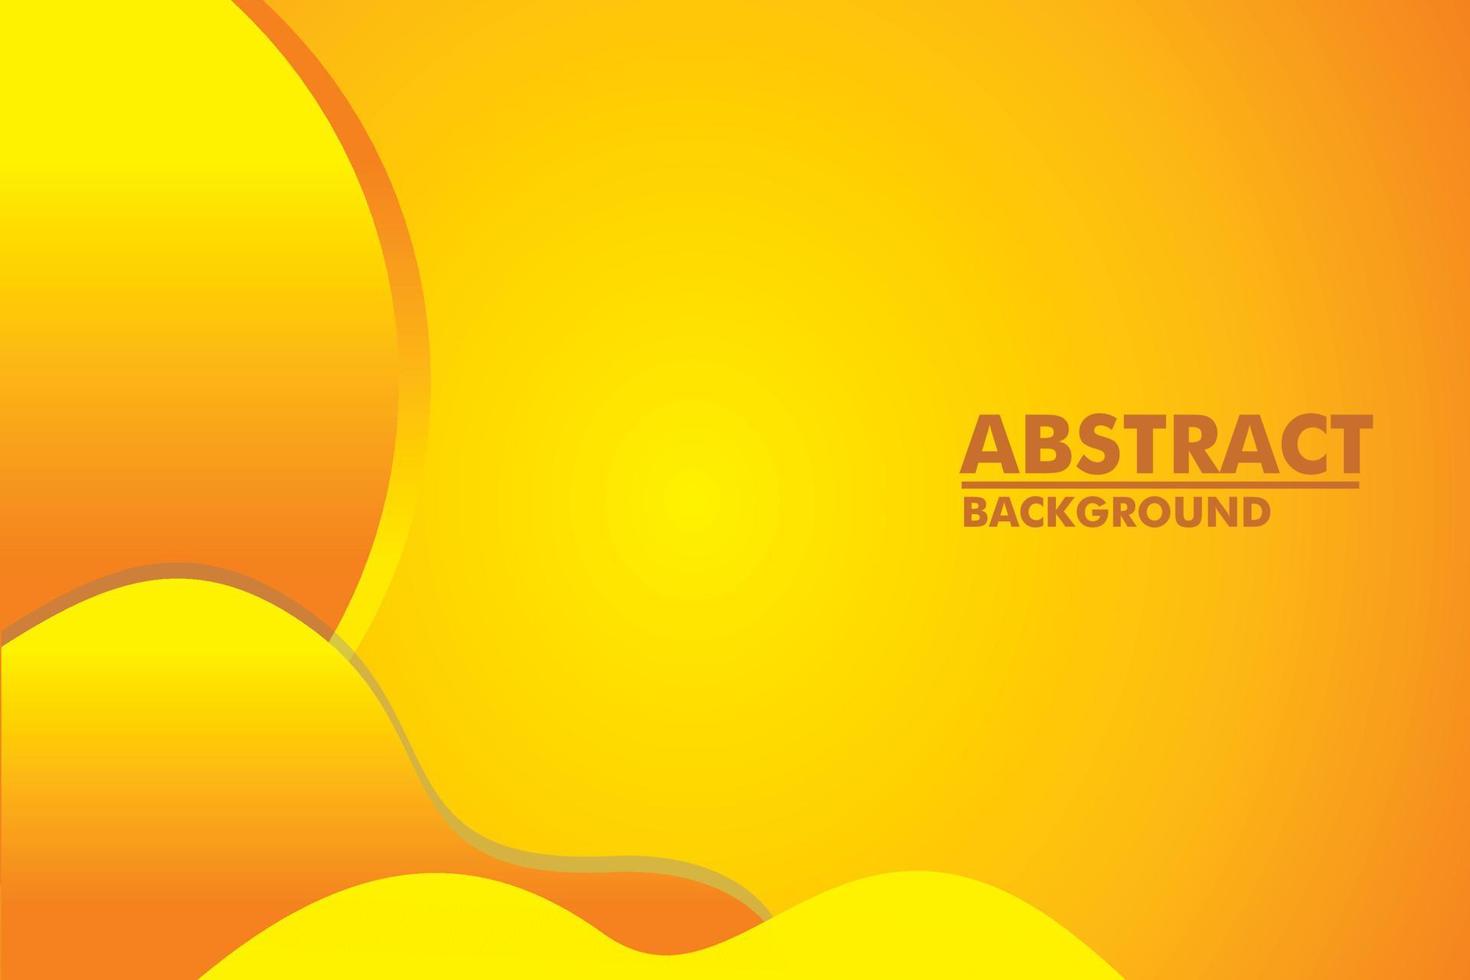 vector illustration of an abstract background, suitable to be a background for your business